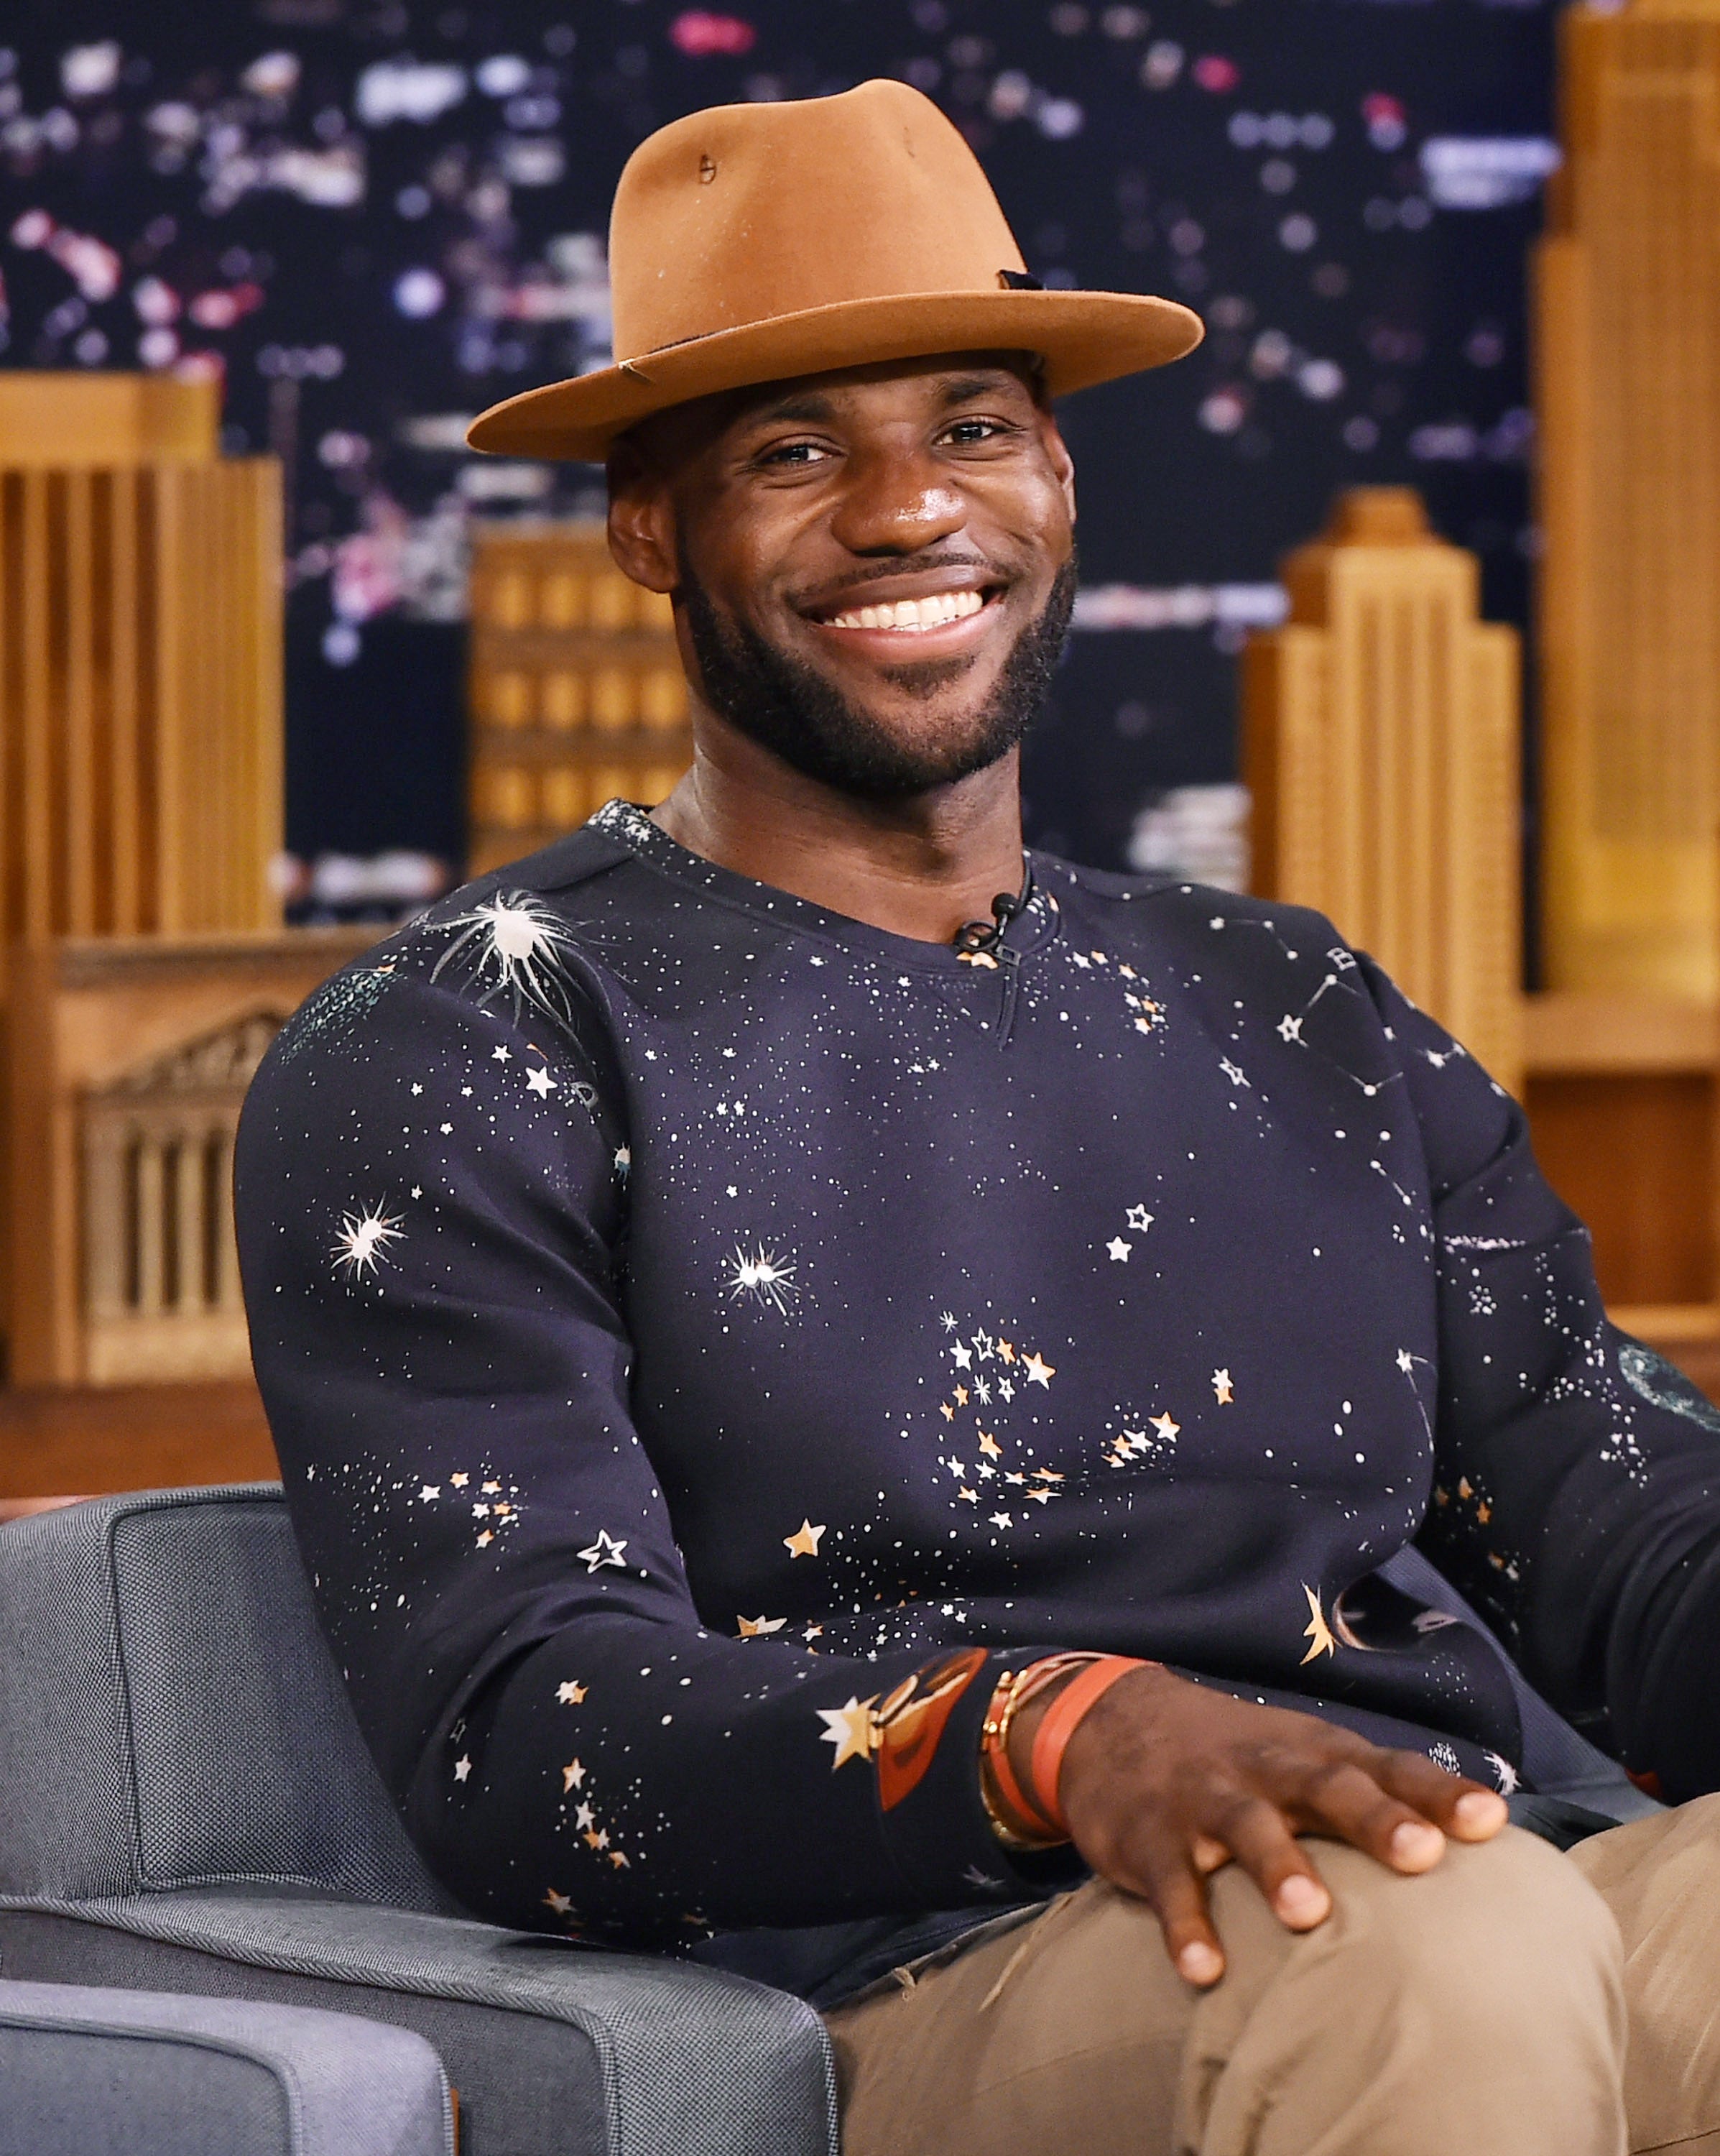 King of Hollywood: LeBron James' 'Shut Up And Dribble' Is Headed To ...